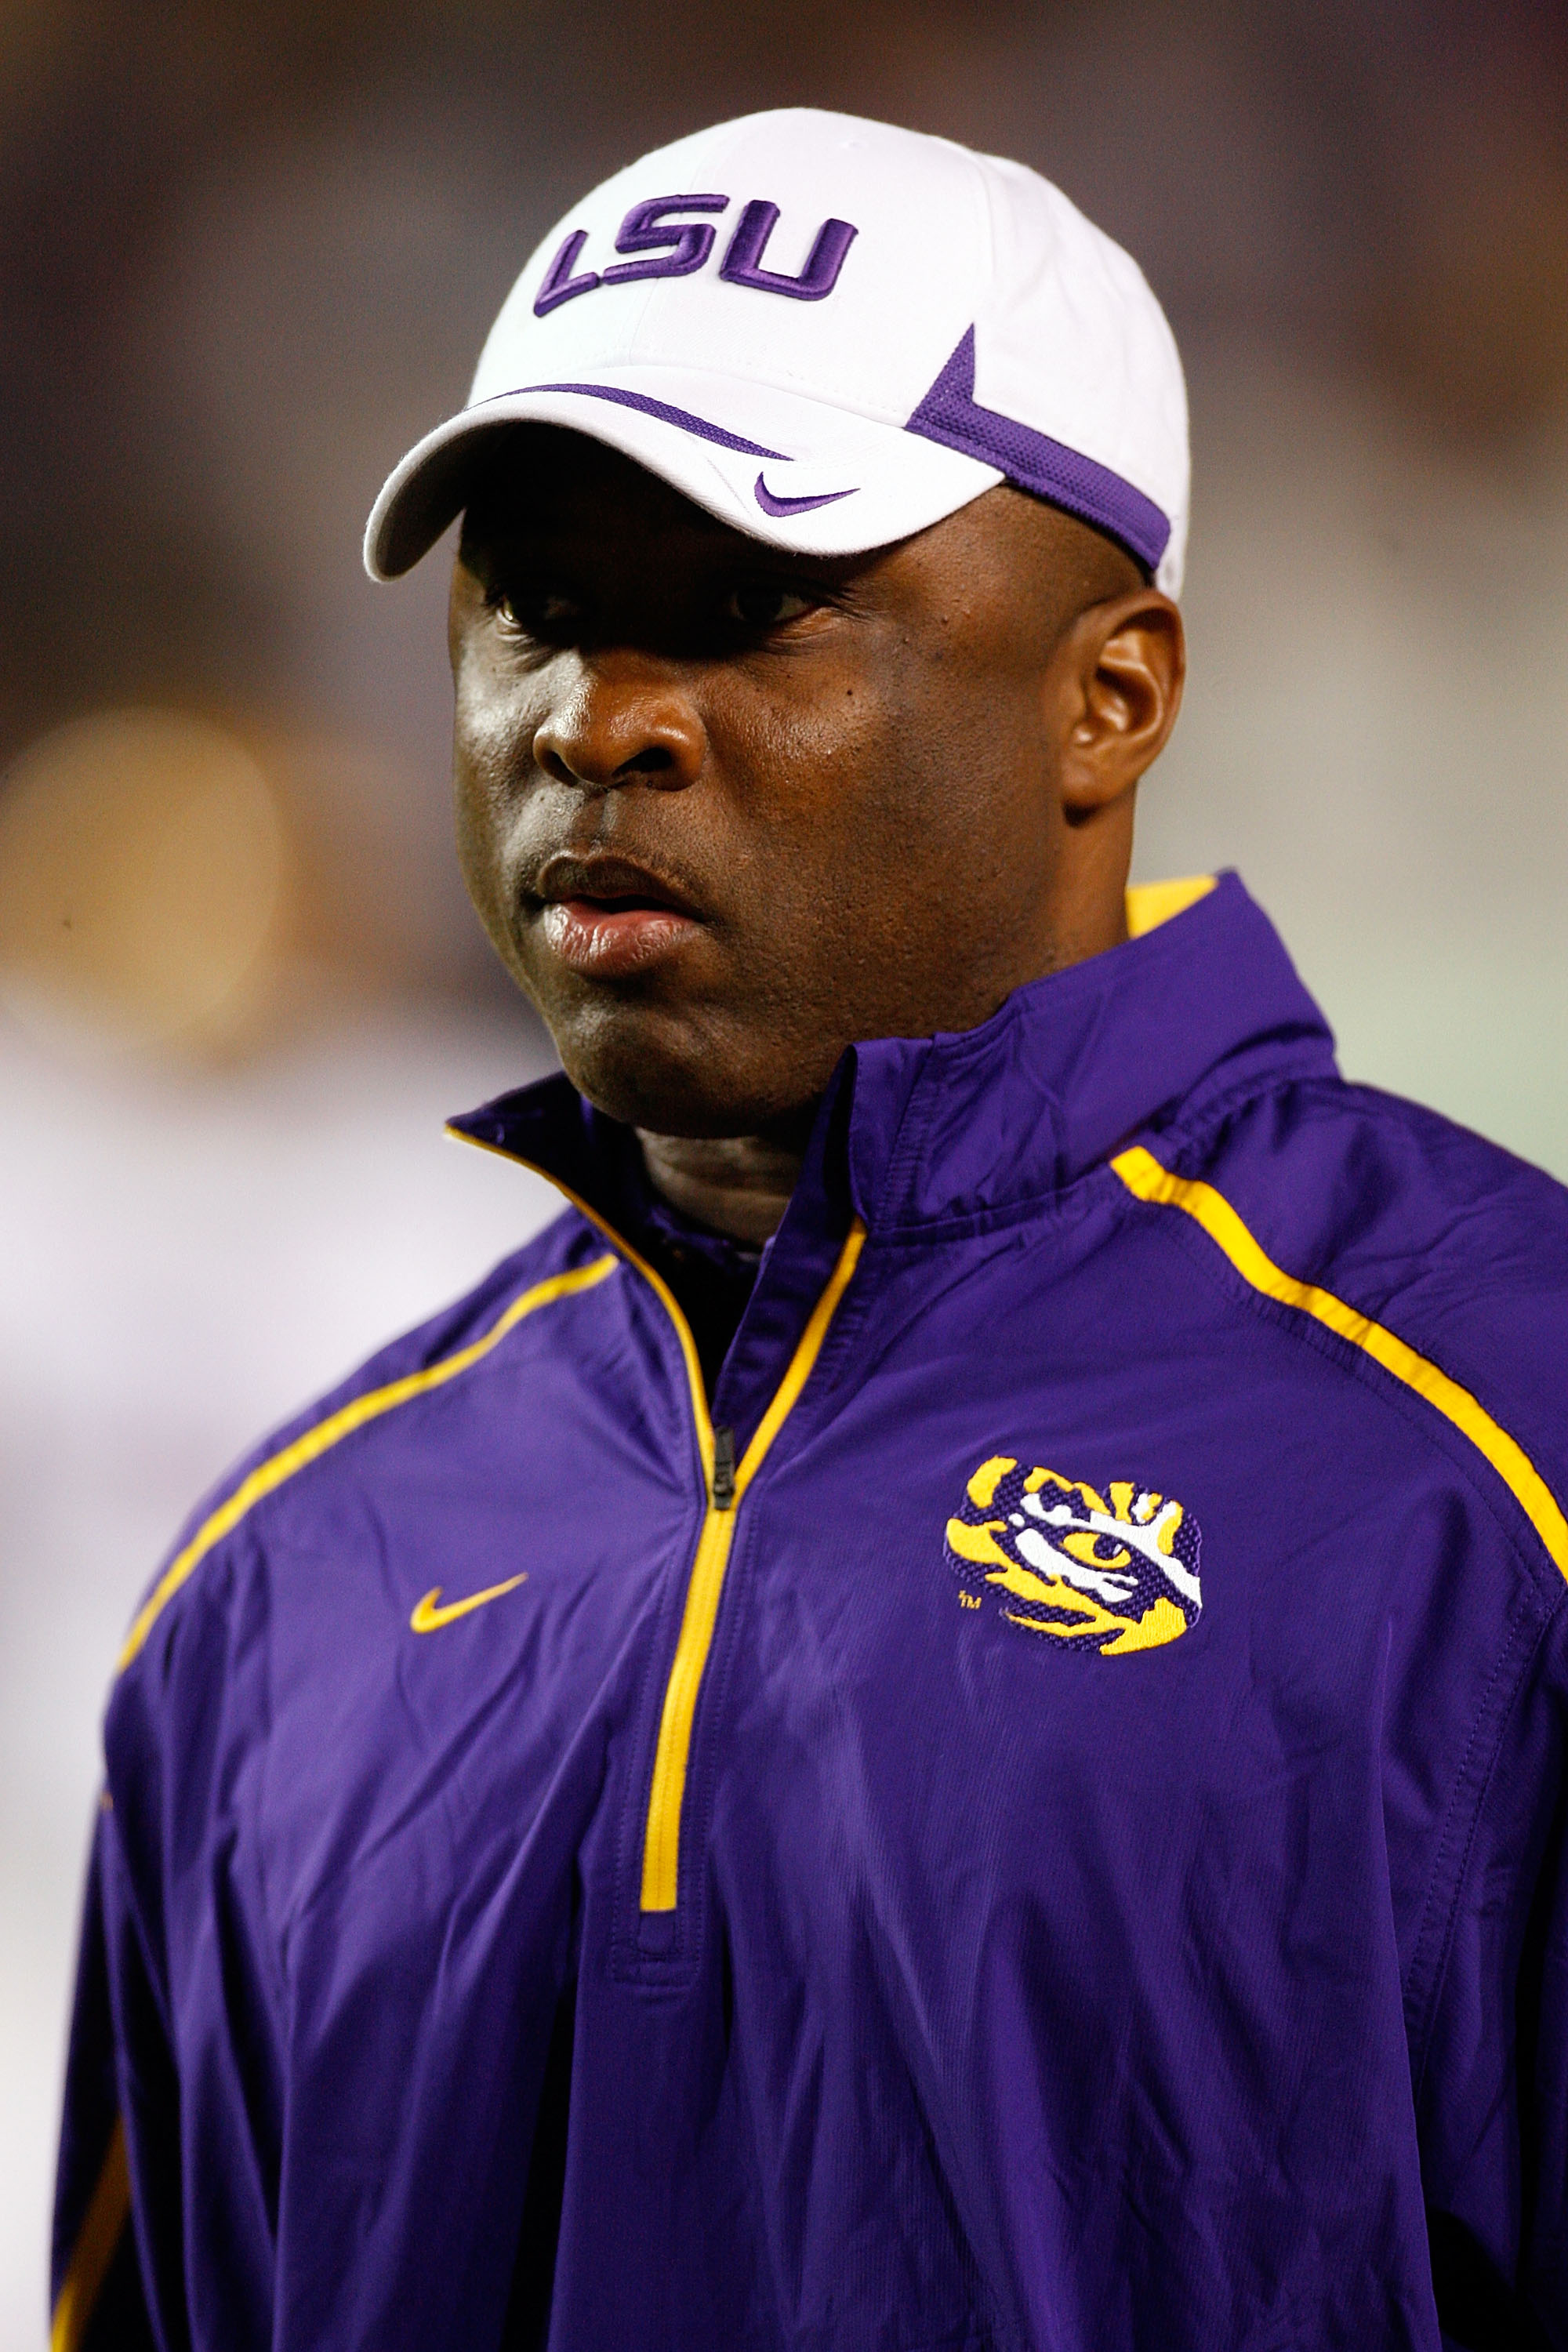 BATON ROUGE, LA - NOVEMBER 28:  Larry Porter of the LSU Tigers watches pre-game warmup against the Arkansas Razorbacks at Tiger Stadium on November 28, 2009 in Baton Rouge, Louisiana.  (Photo by Chris Graythen/Getty Images)